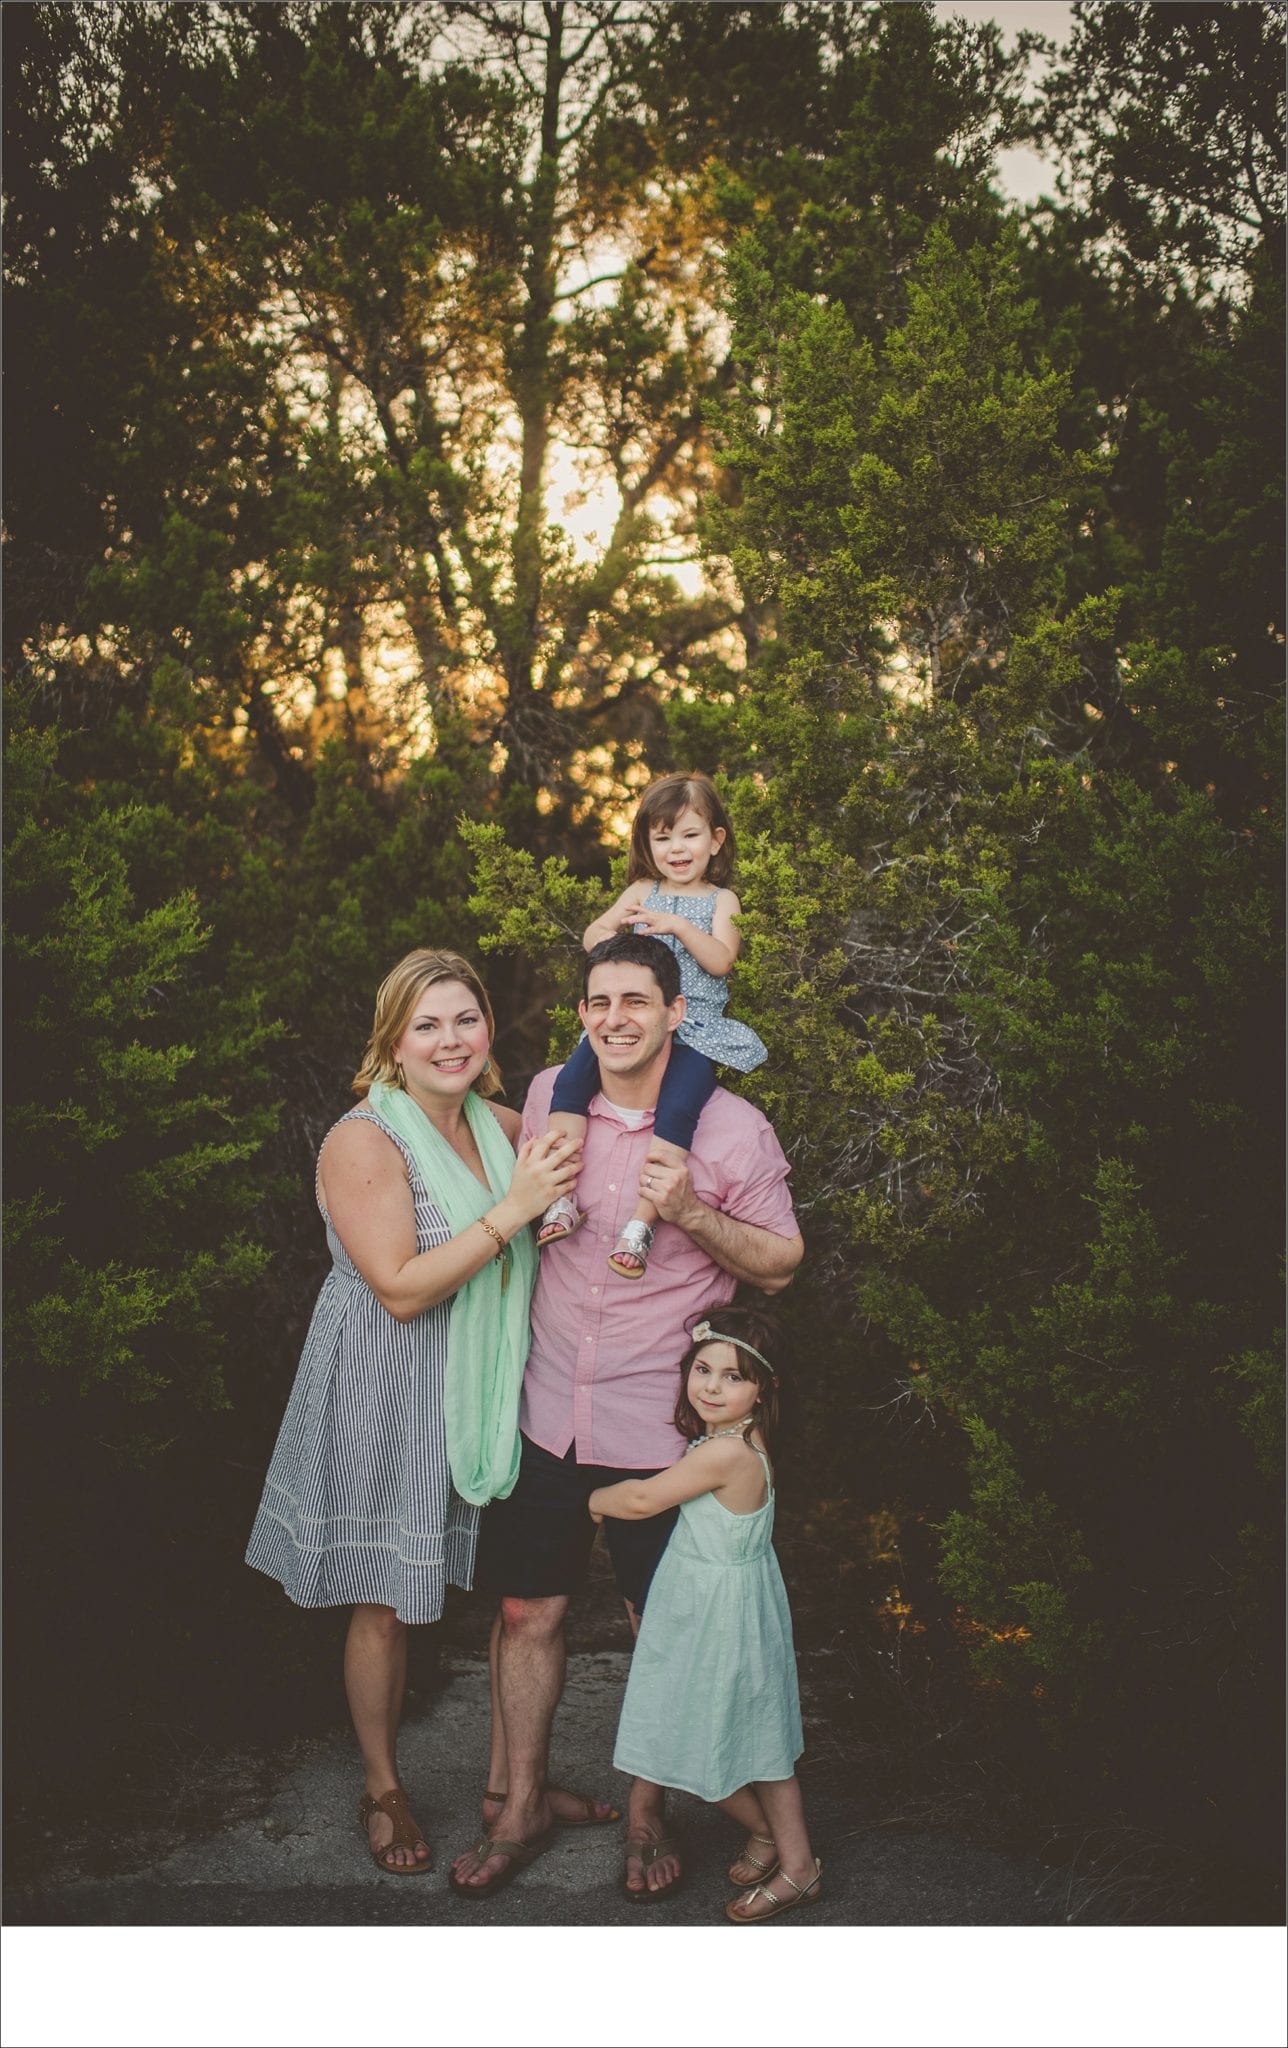 great family sessions, happy families, Austin to Sun Prairie WI